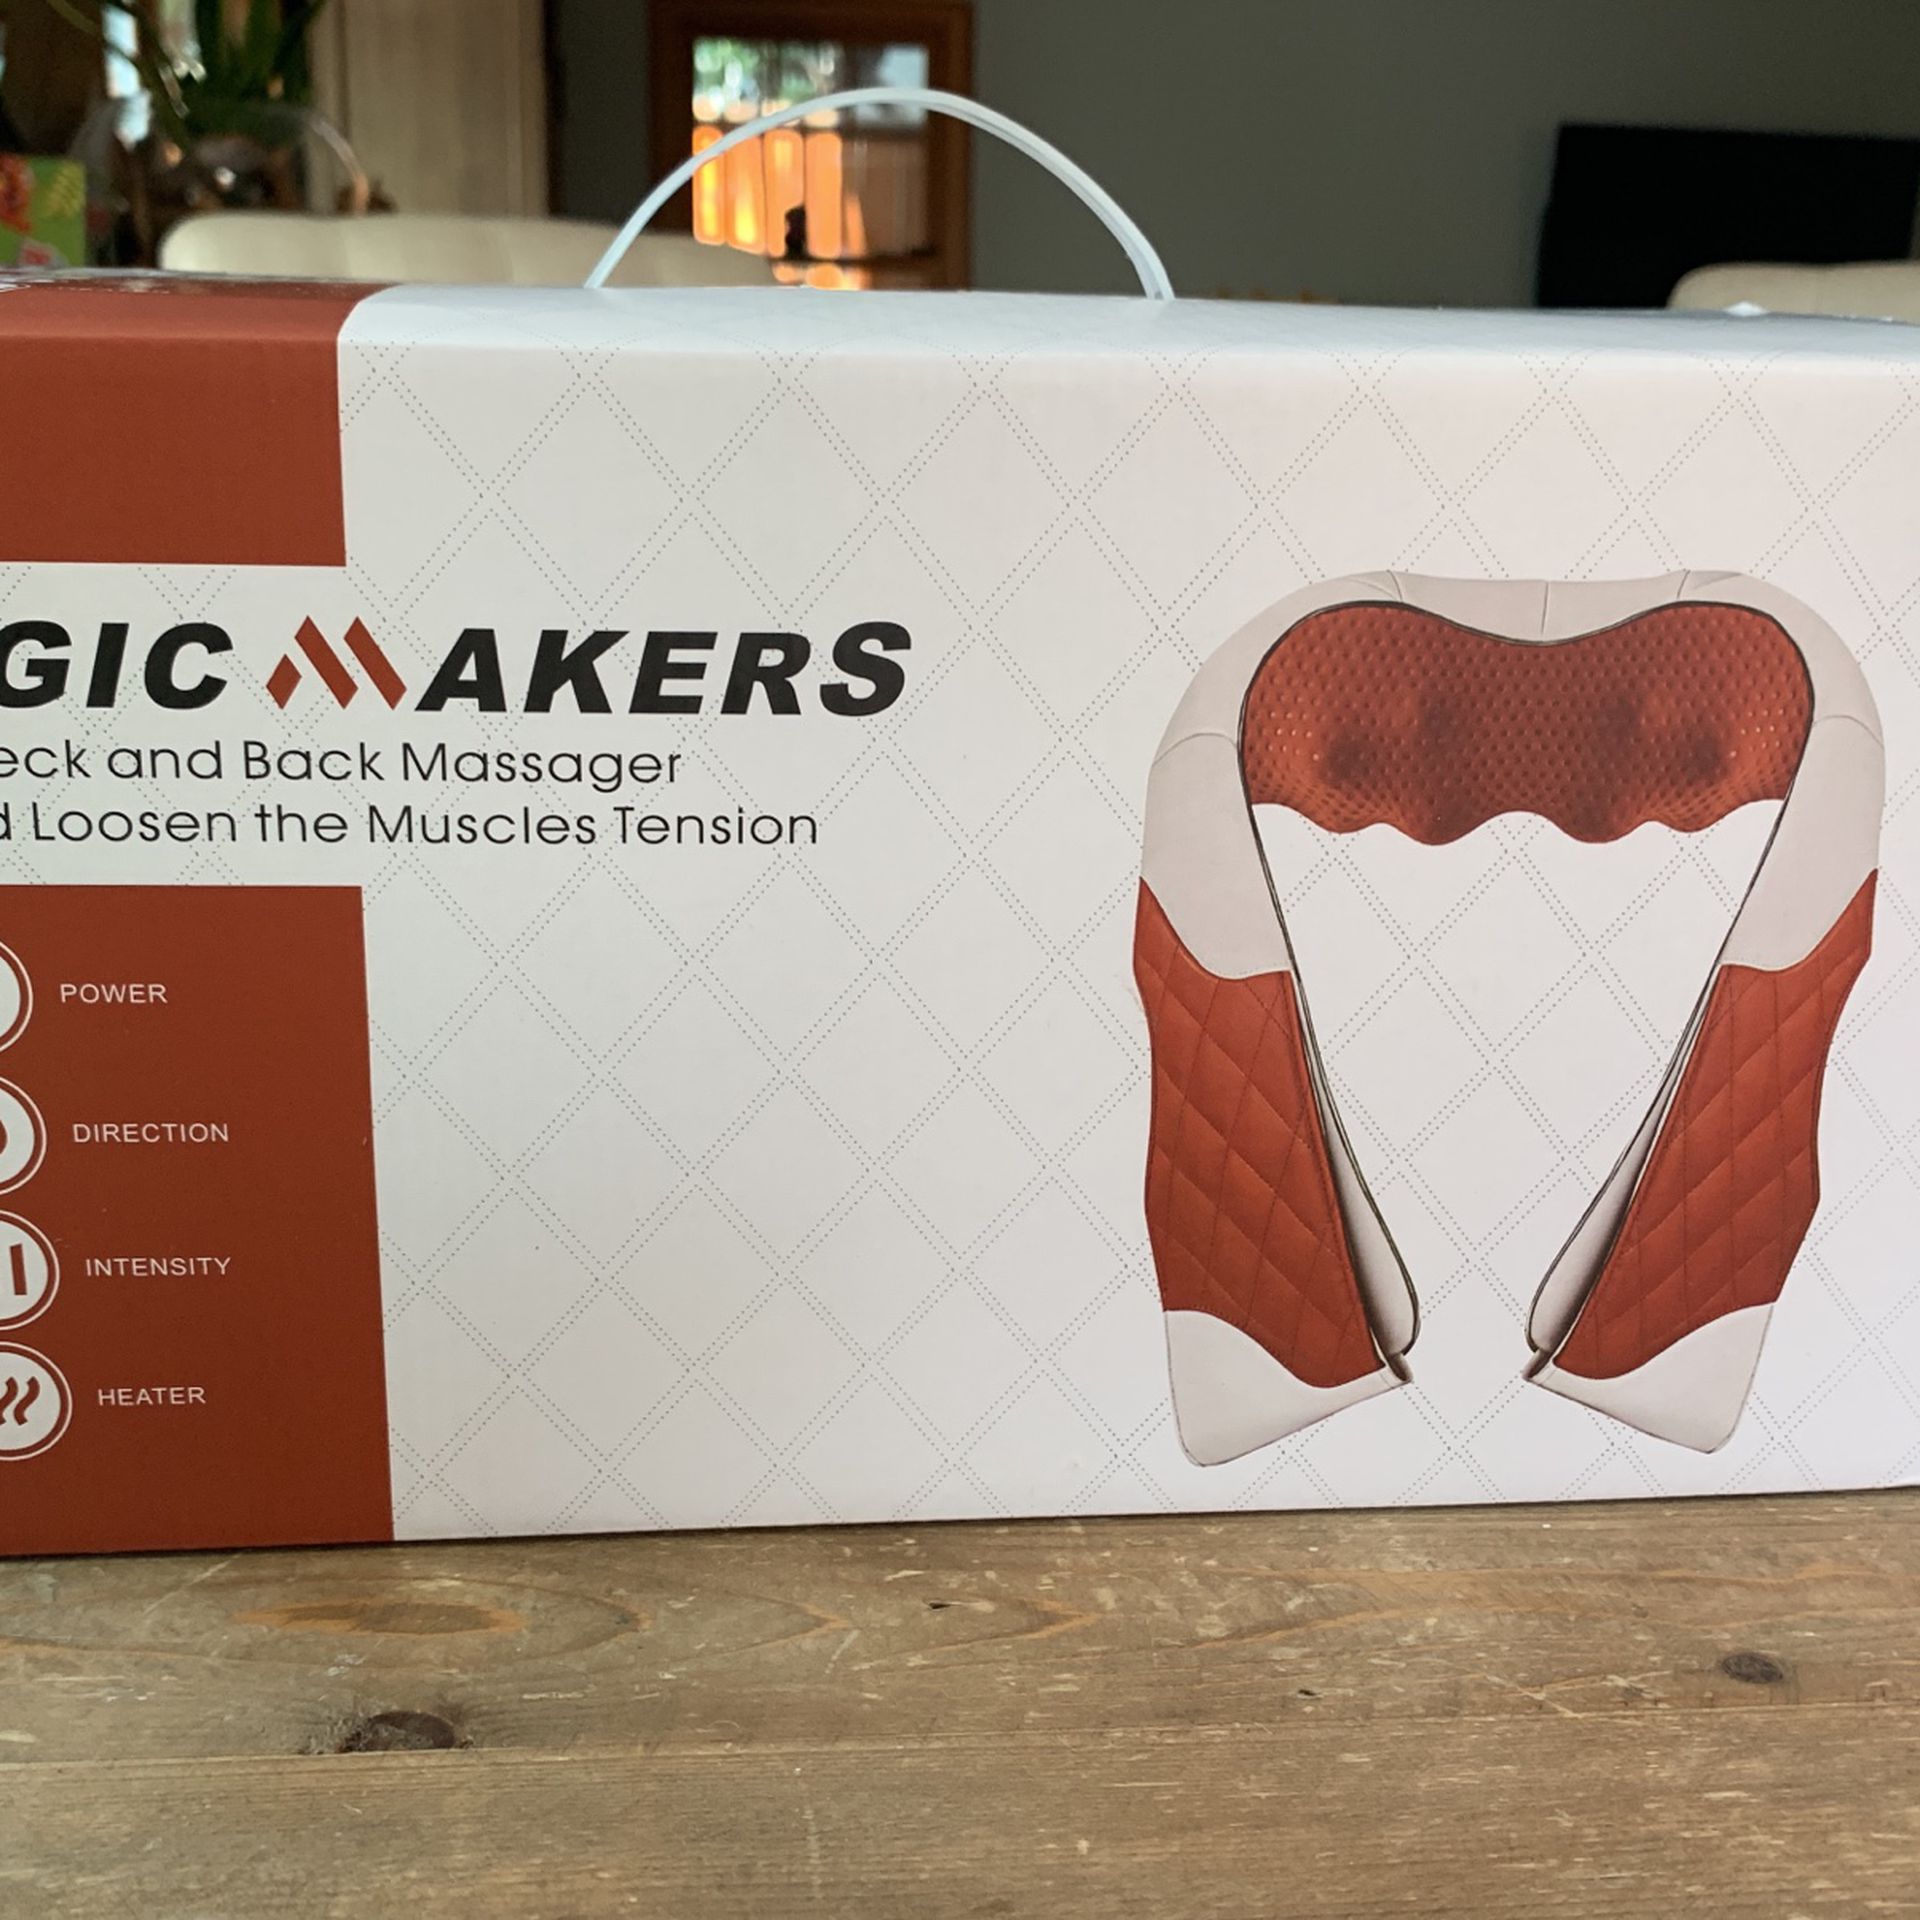 Magic Makers Neck Massager, Relieves muscle tension and increases